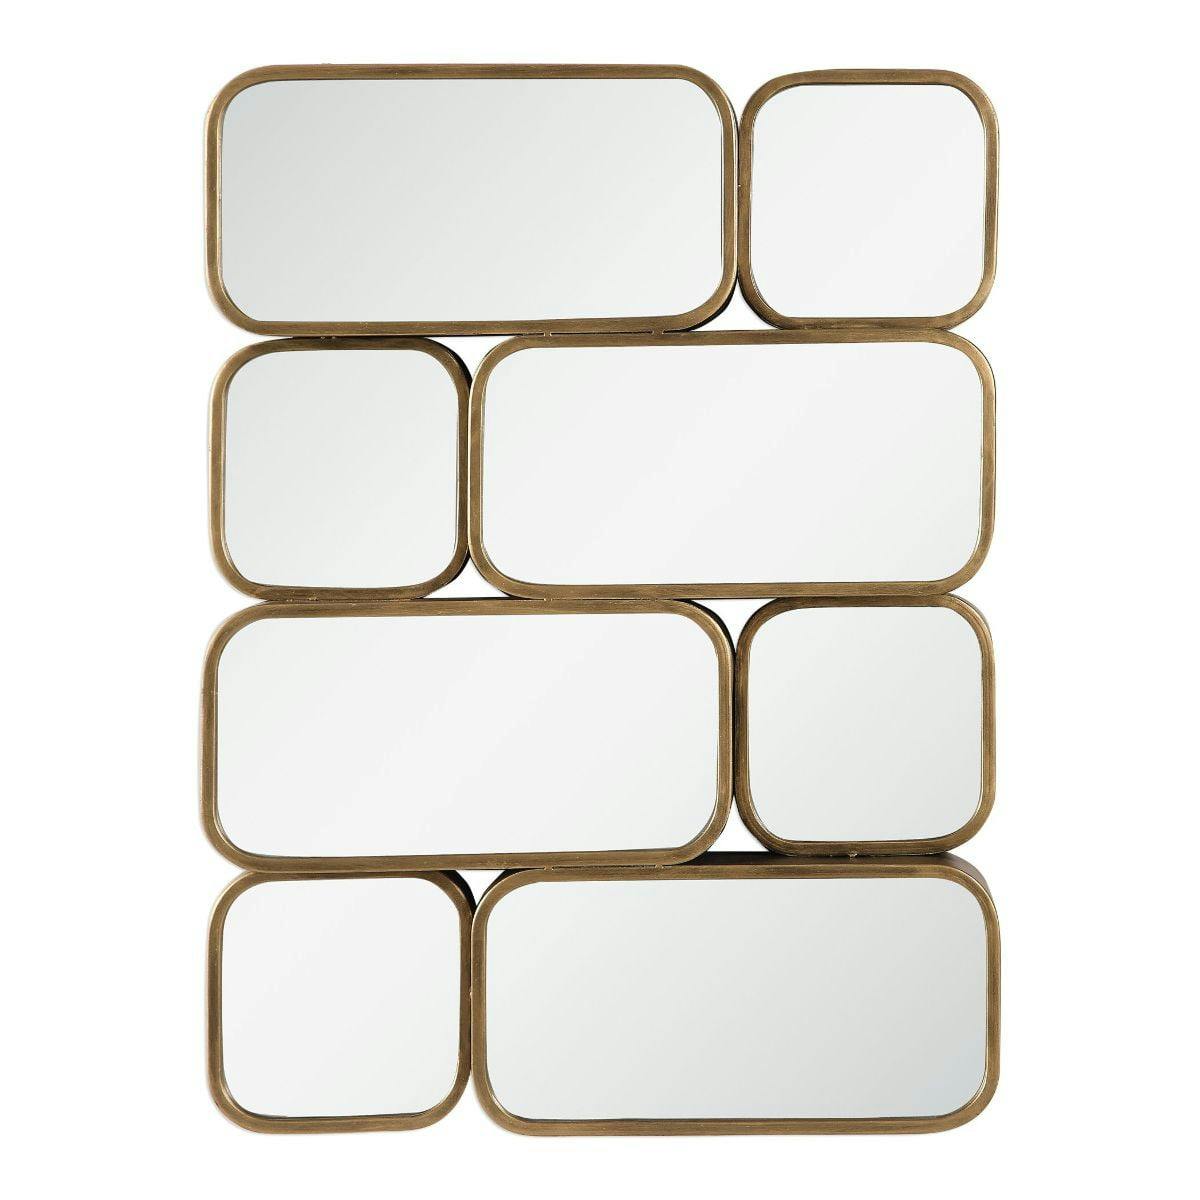 Contemporary Gold Rectangular Wall Mirror with Antiqued Finish